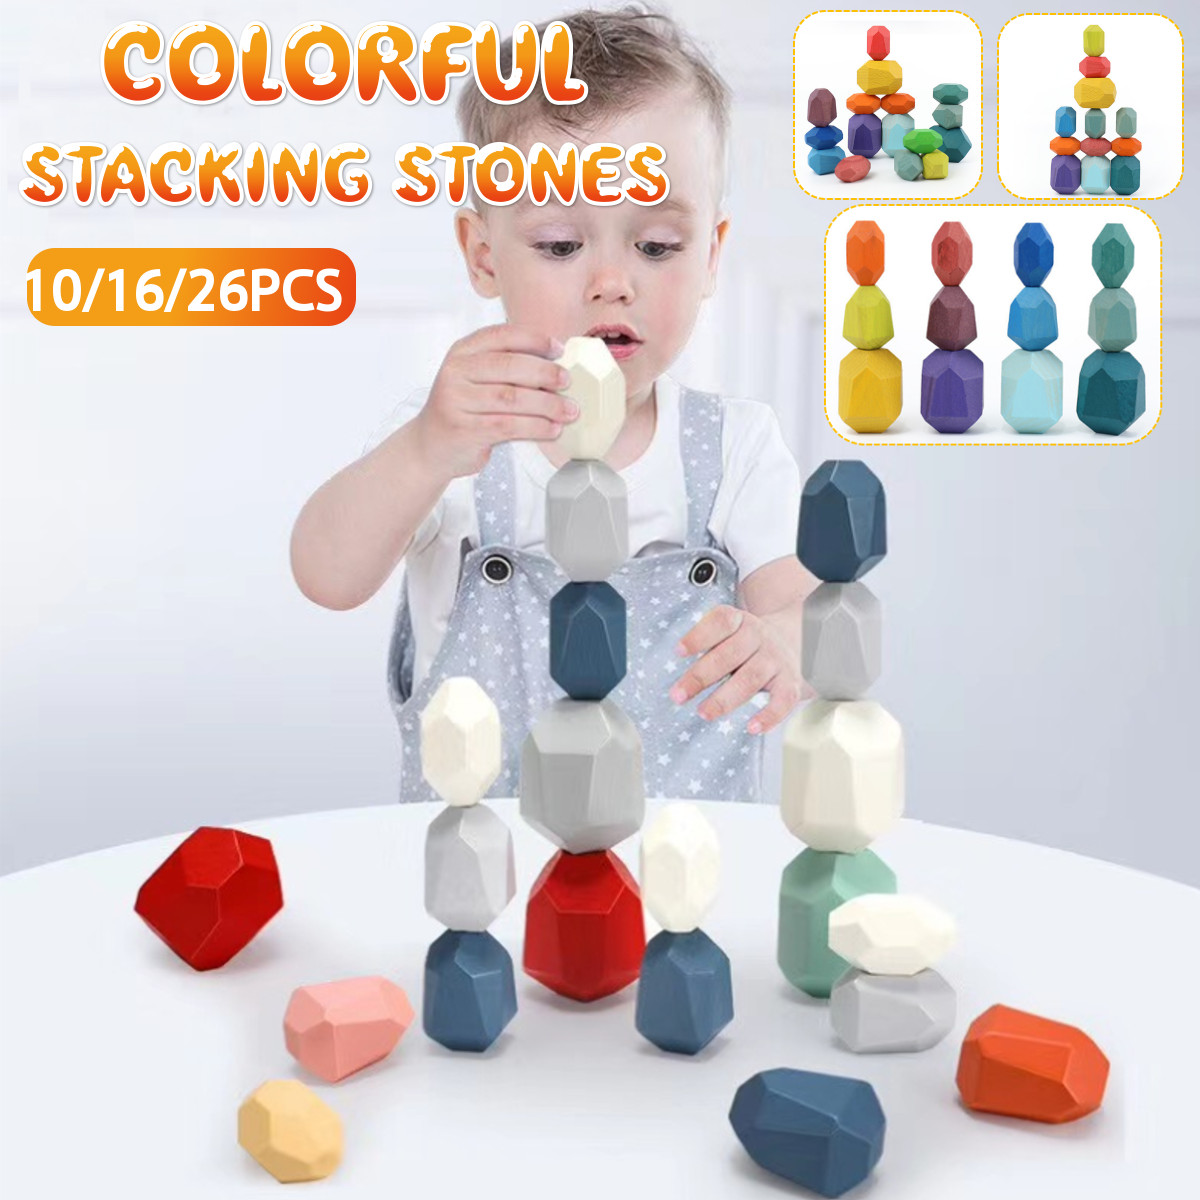 101626-Pcs-Wood-Colorful-Stone-Stacking-Game-Building-Block-Education-Set-Toy-for-Kids-Gift-1887123-1